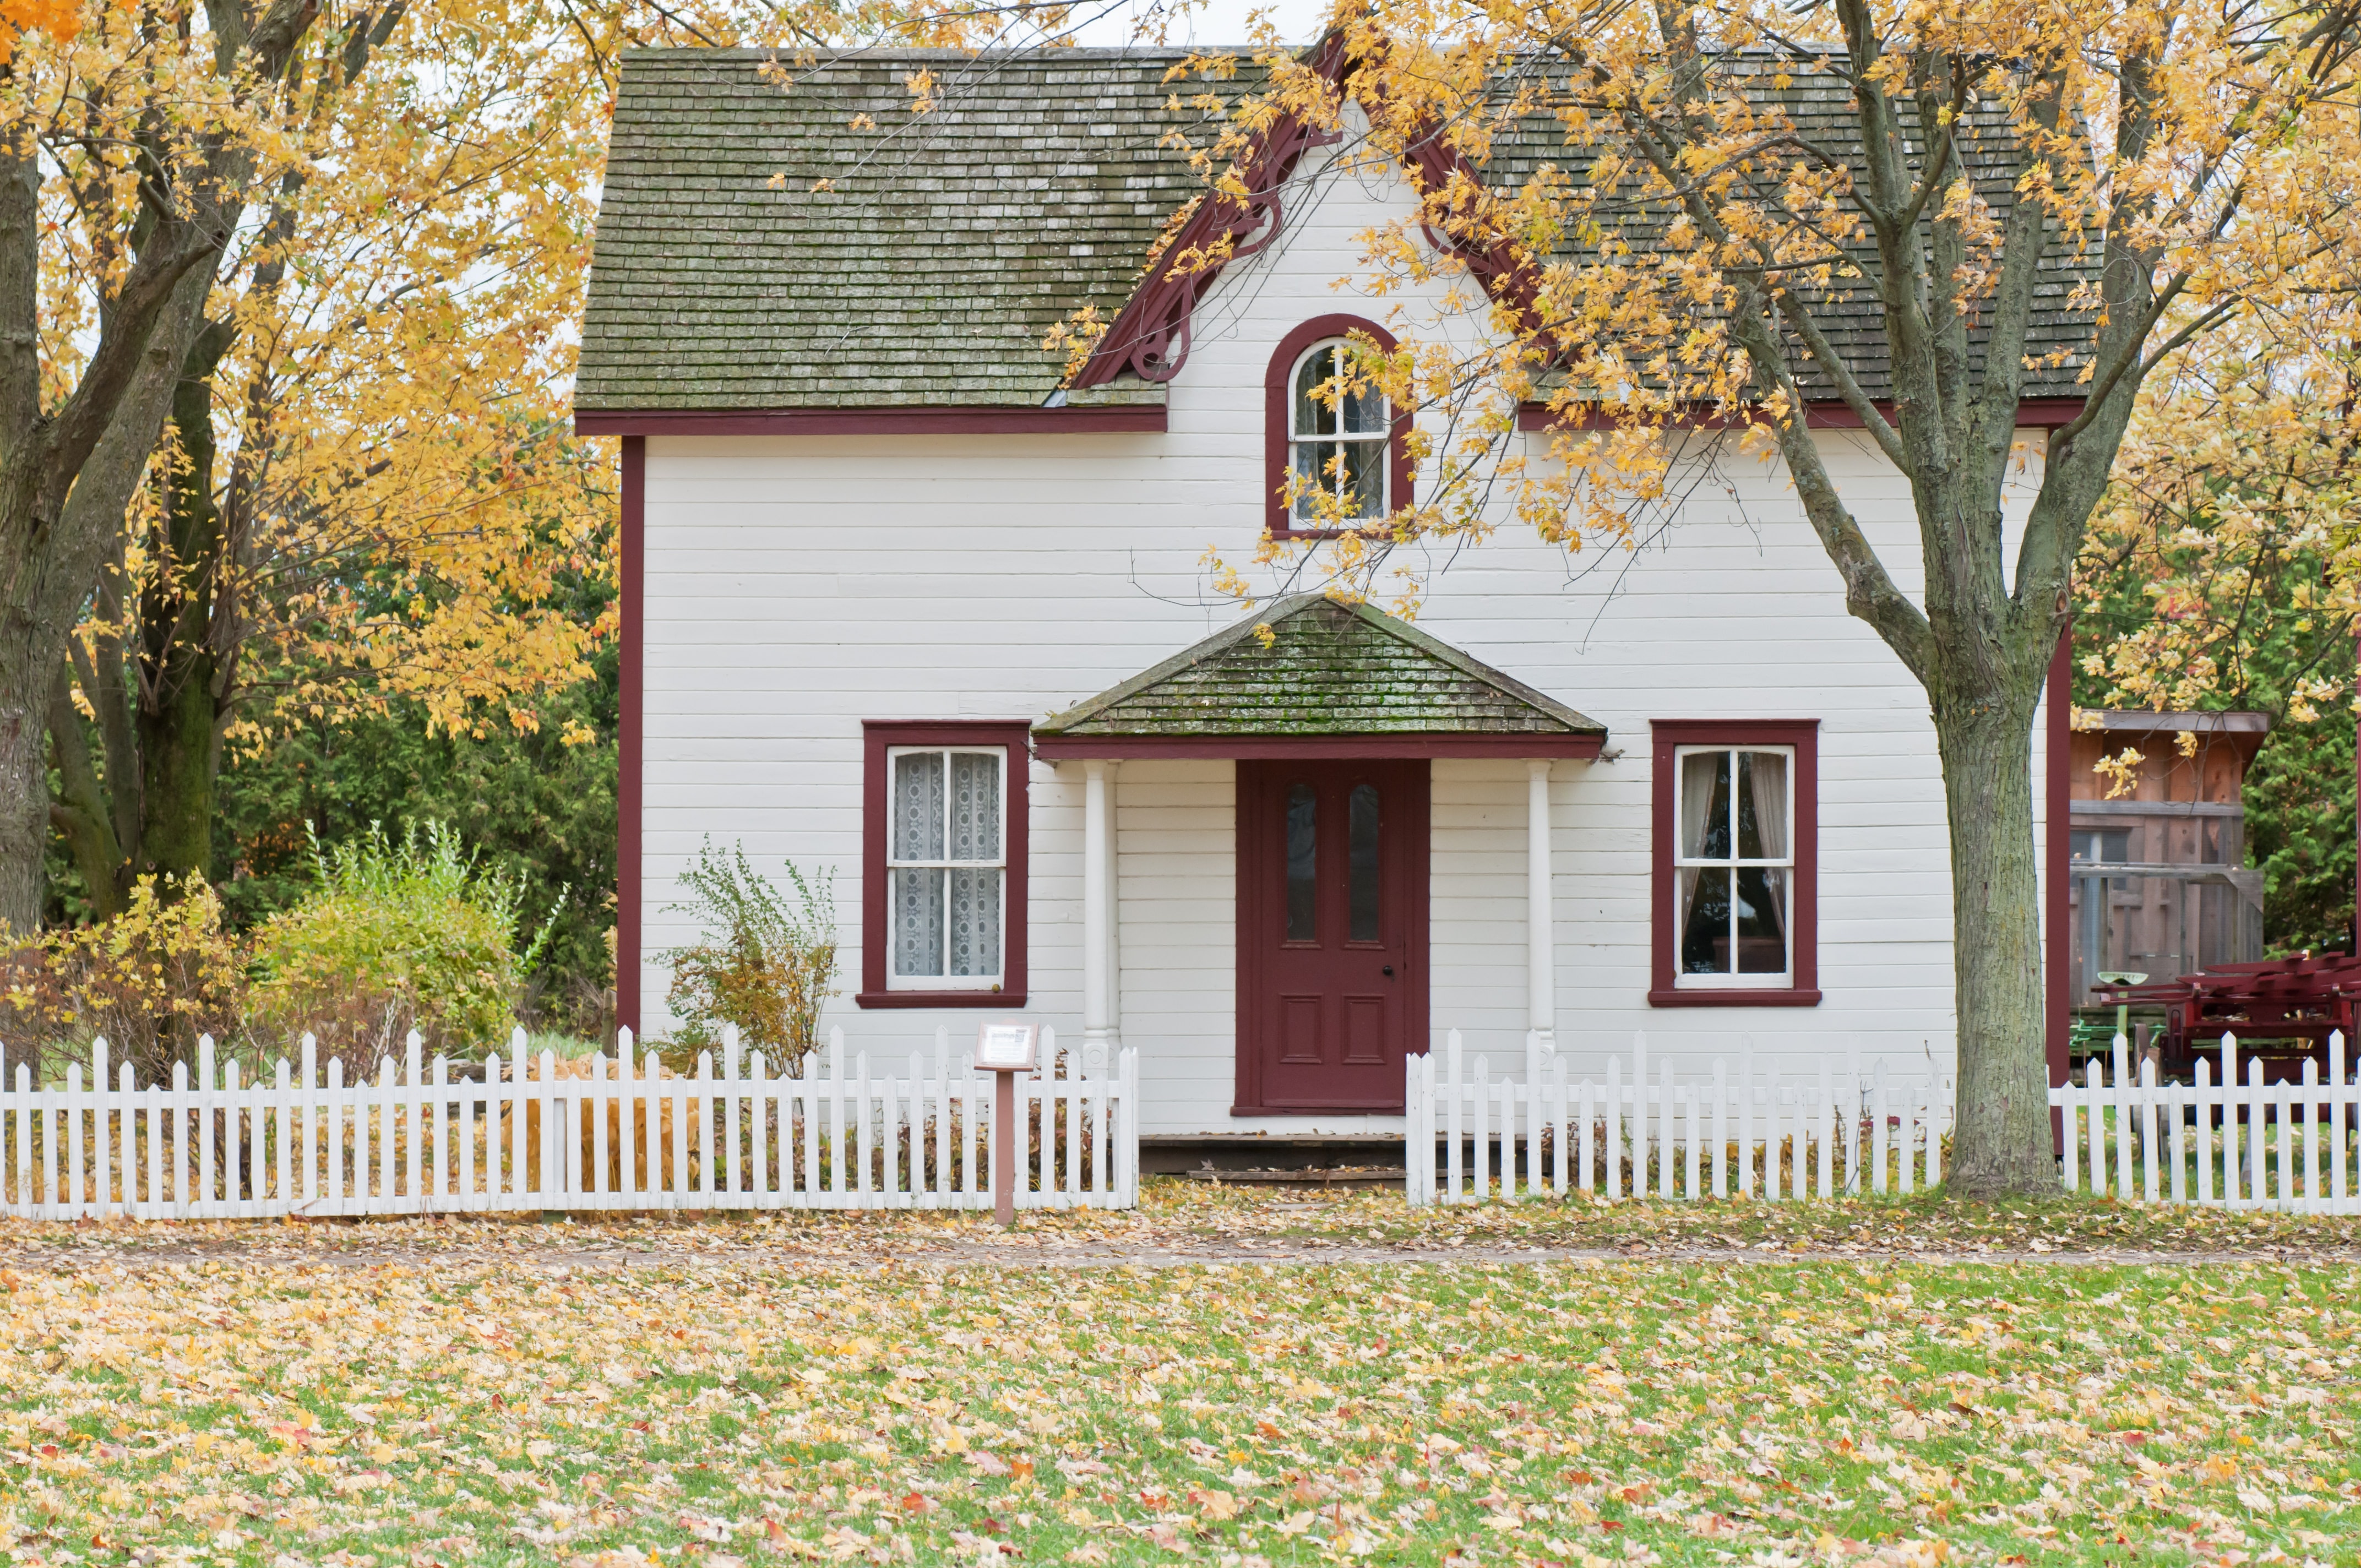 What to Do With a Home You Inherit